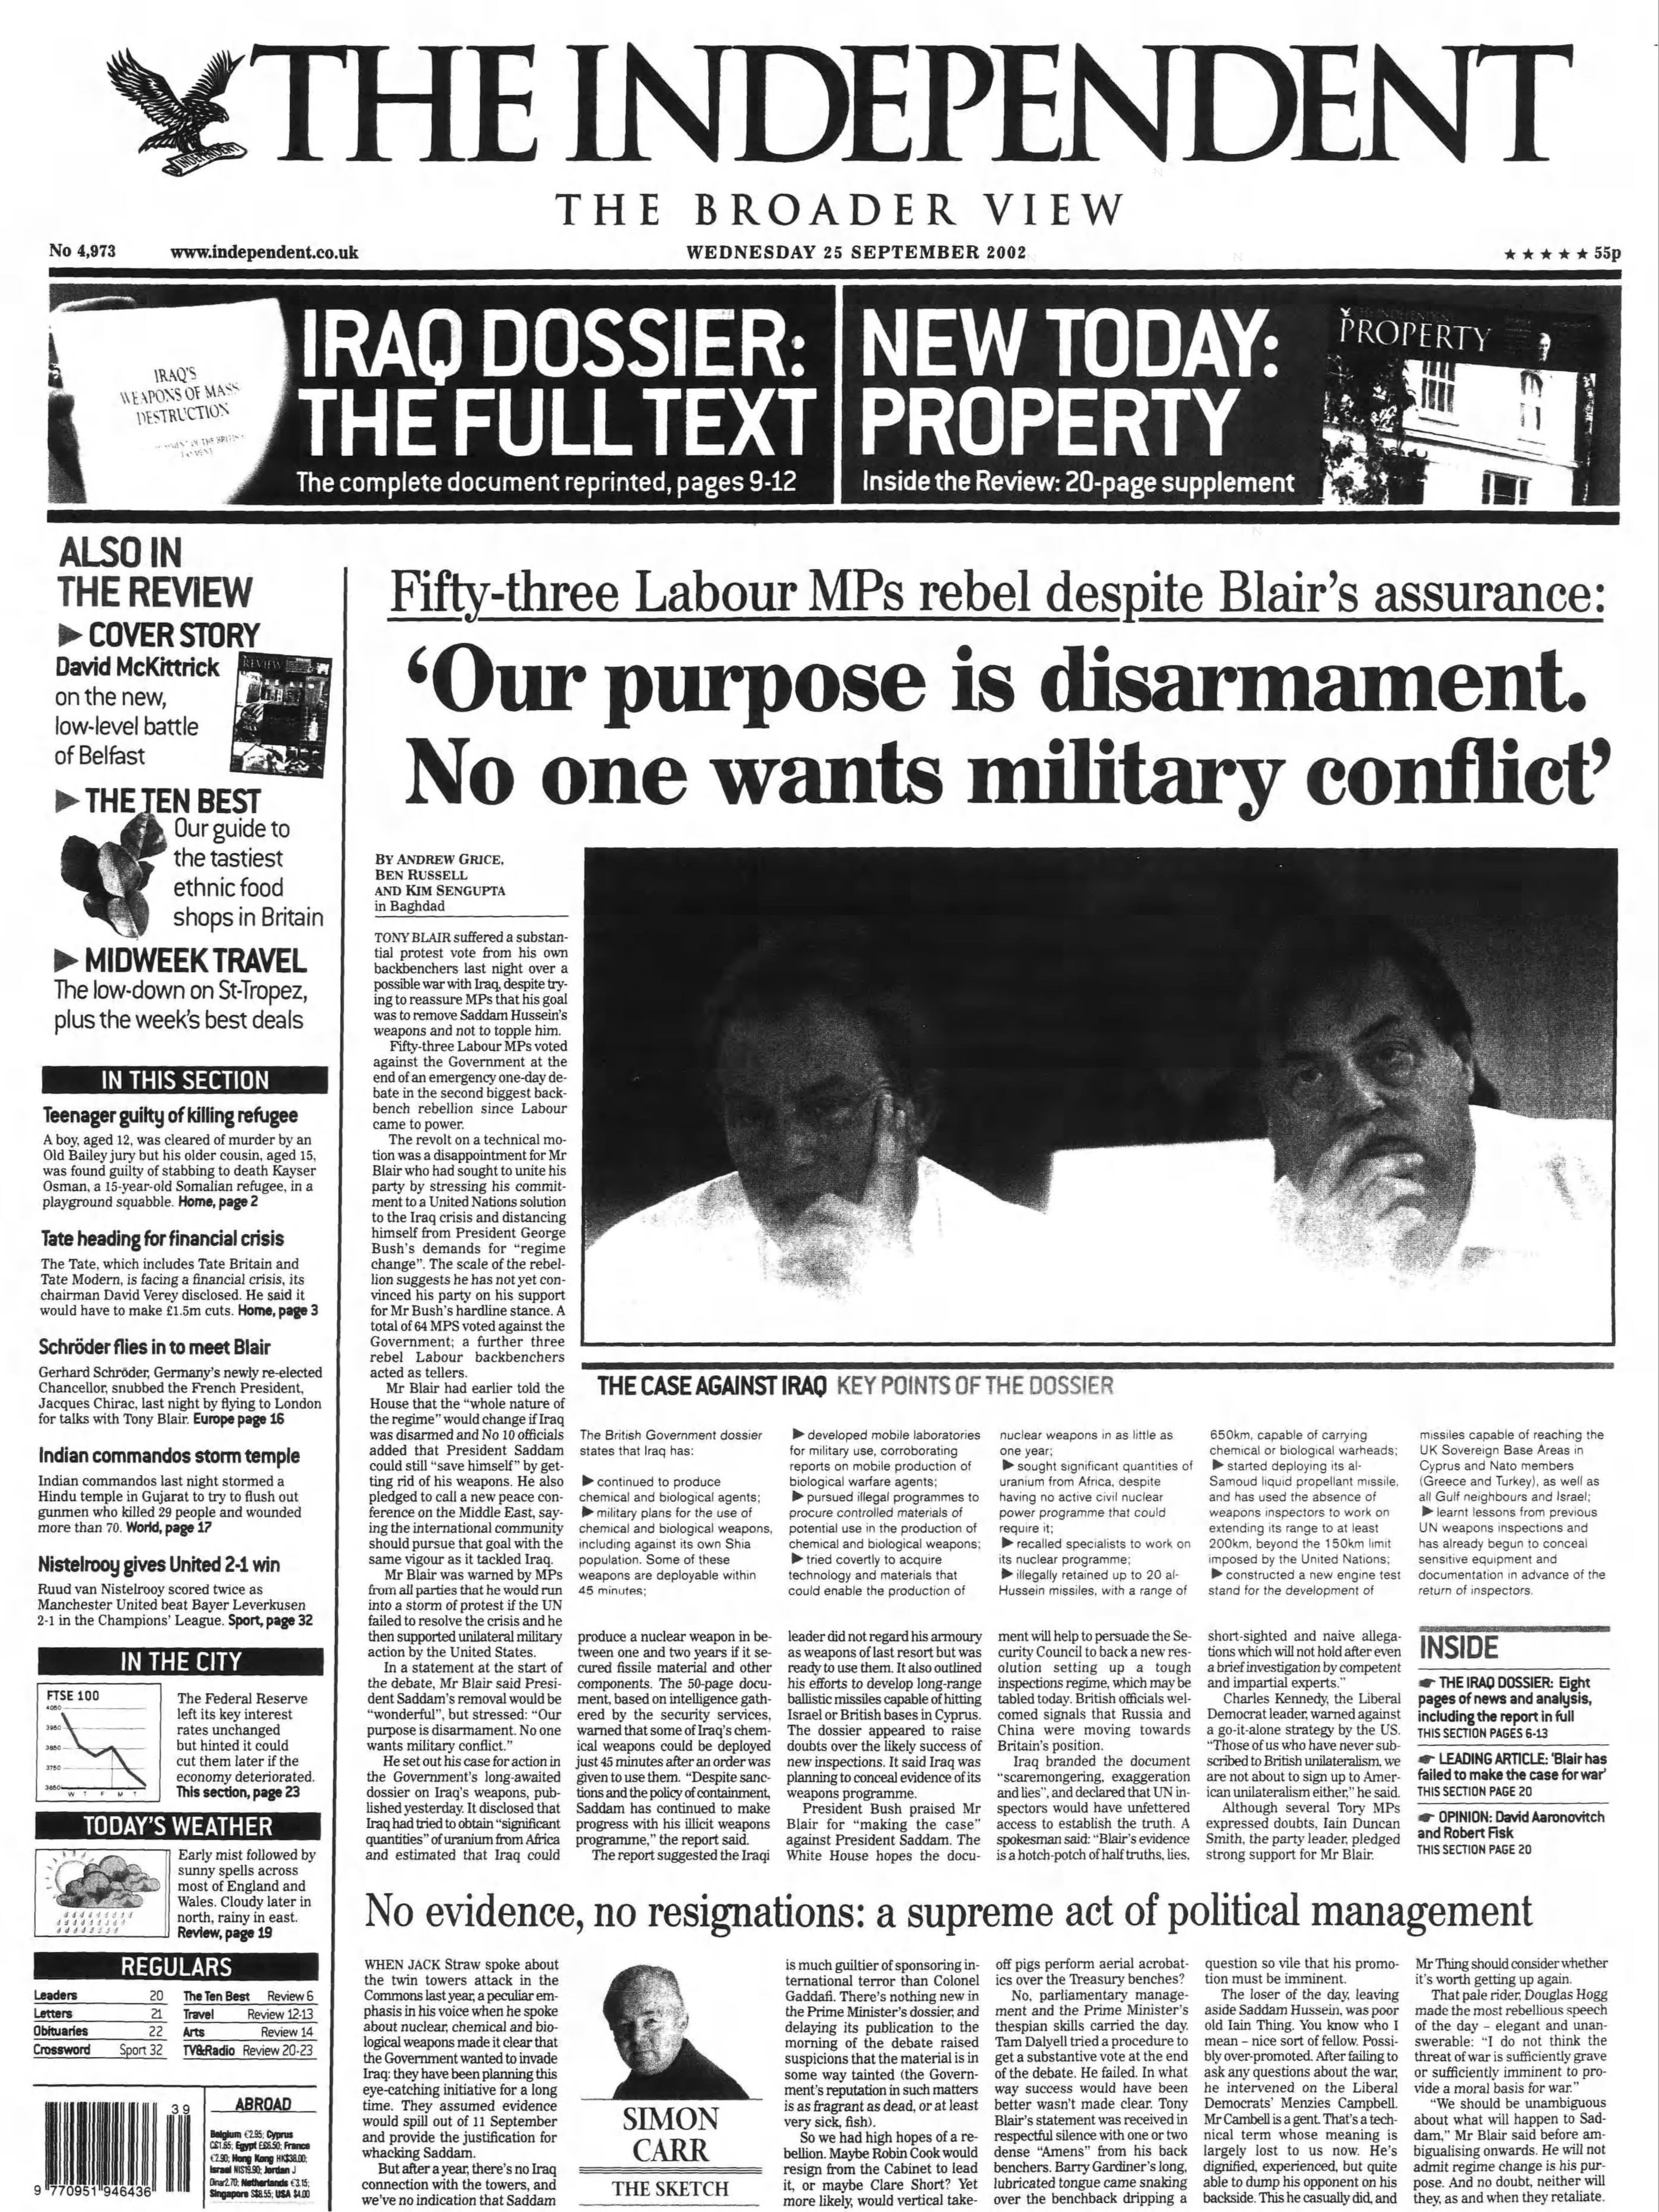 The Independent front page on 25 September 2002